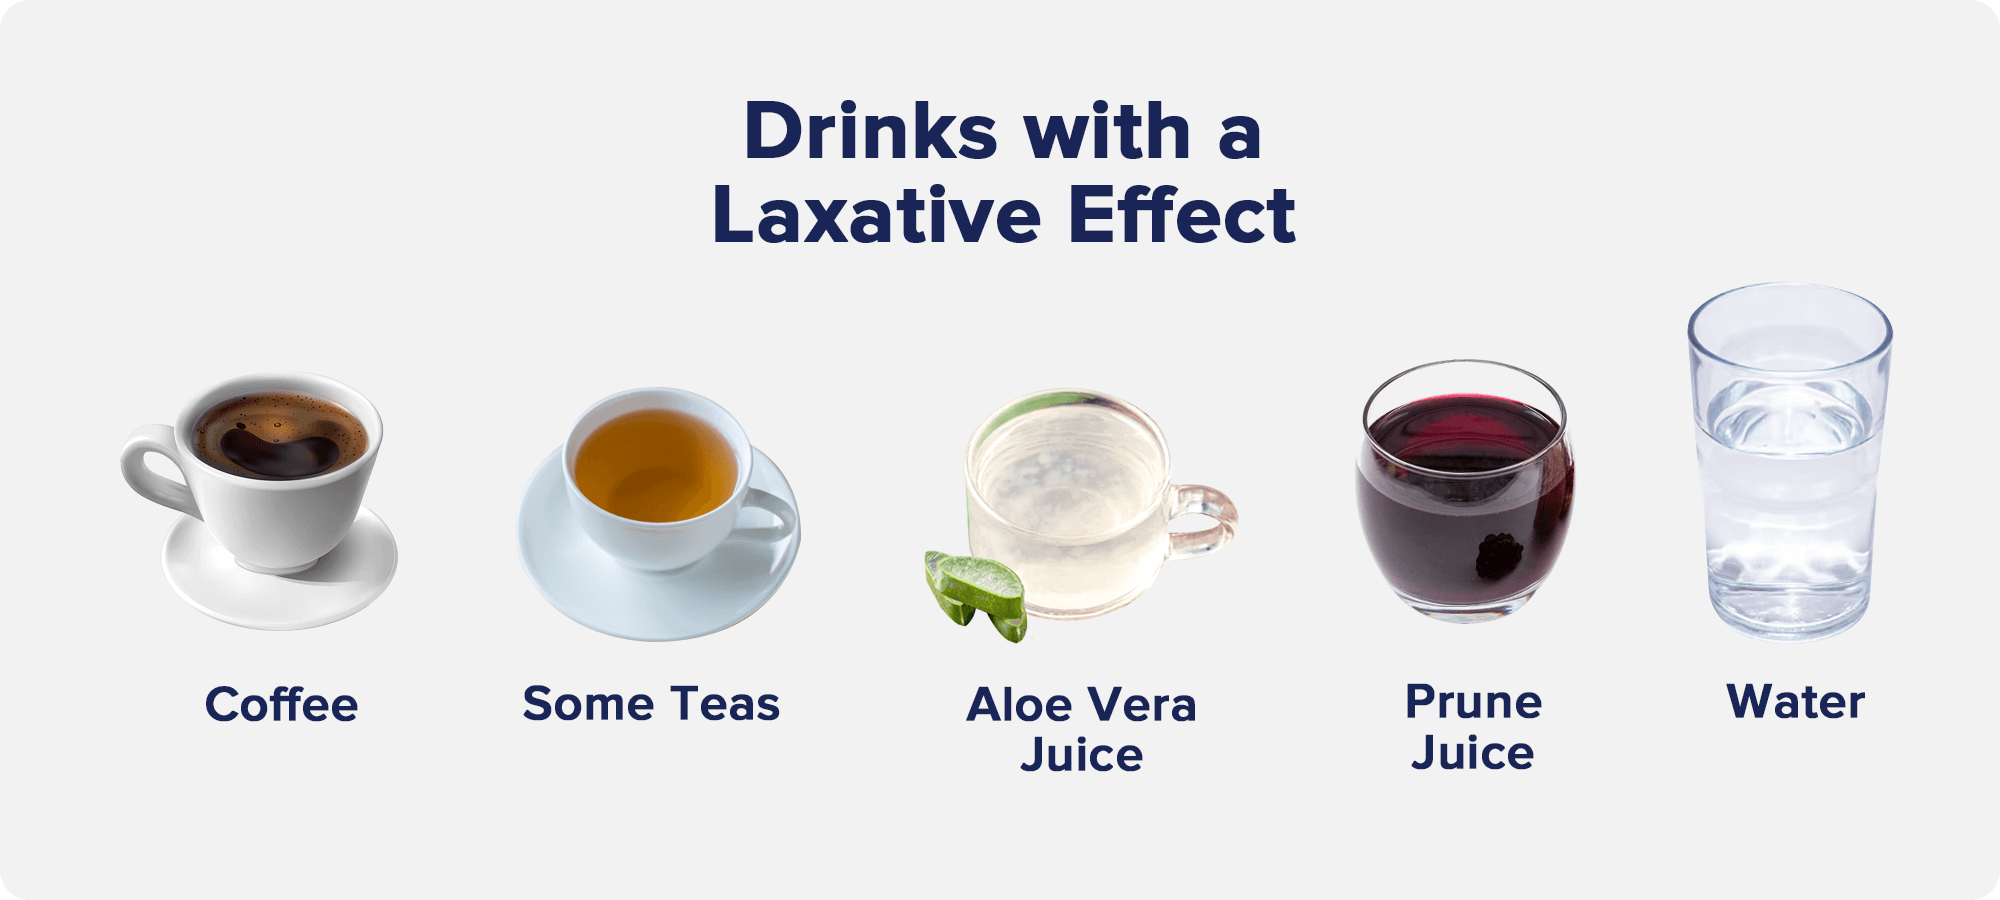 Drinks with a Laxative Effect